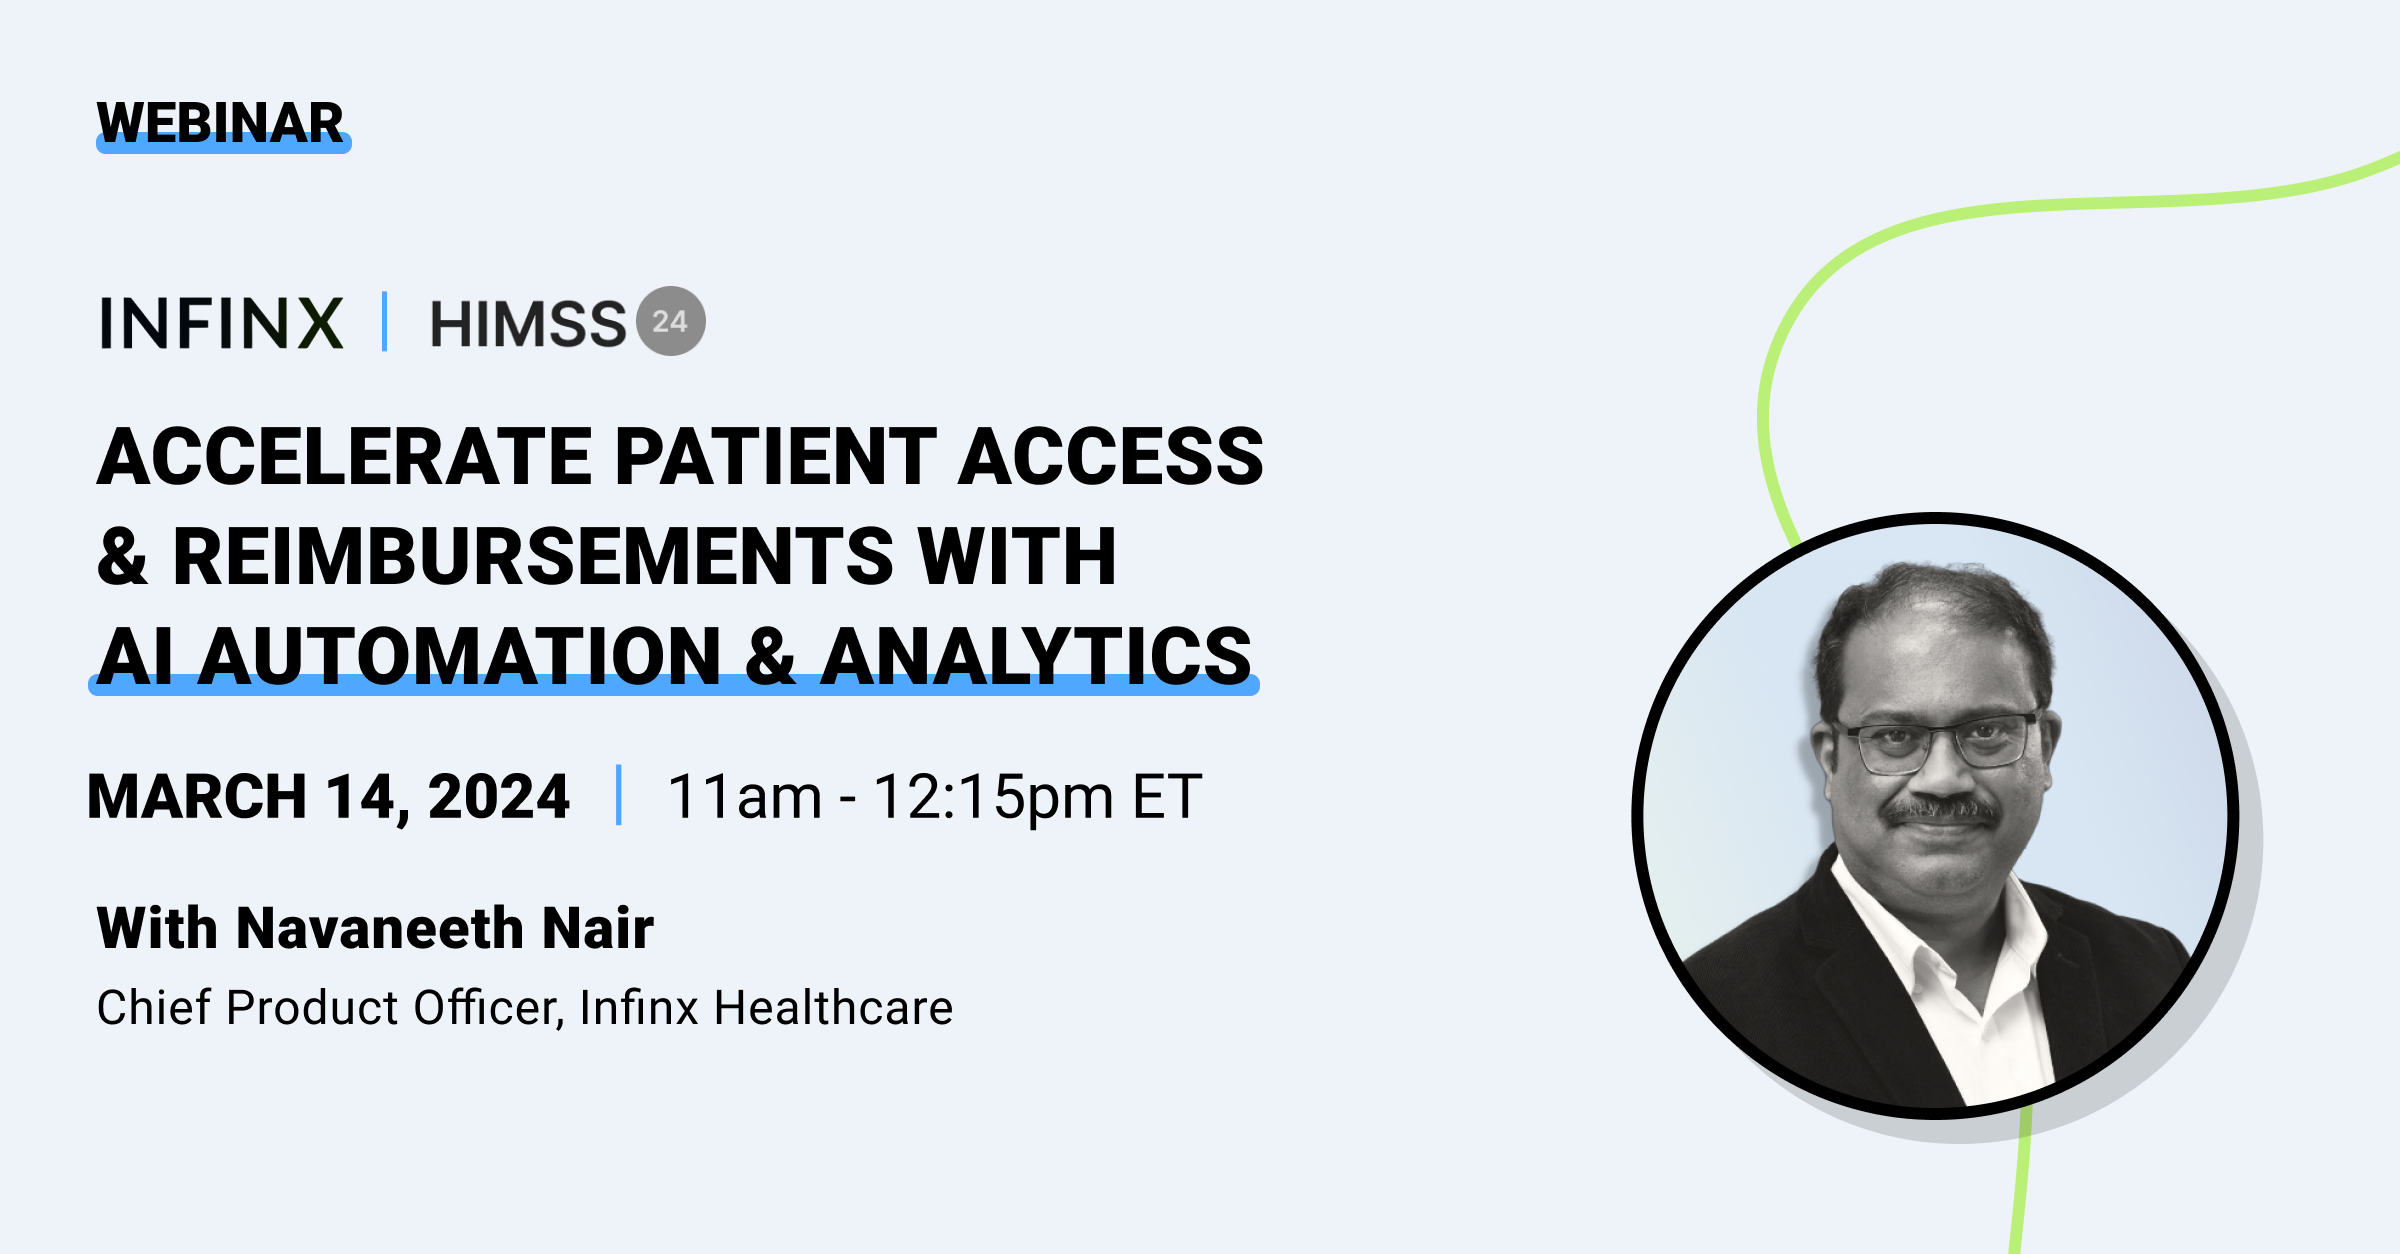 Accelerate Patient Access & Reimbursements with AI, Automation & Analytics with Navaneeth Nair Chief Product Officer Infinx Healthcare